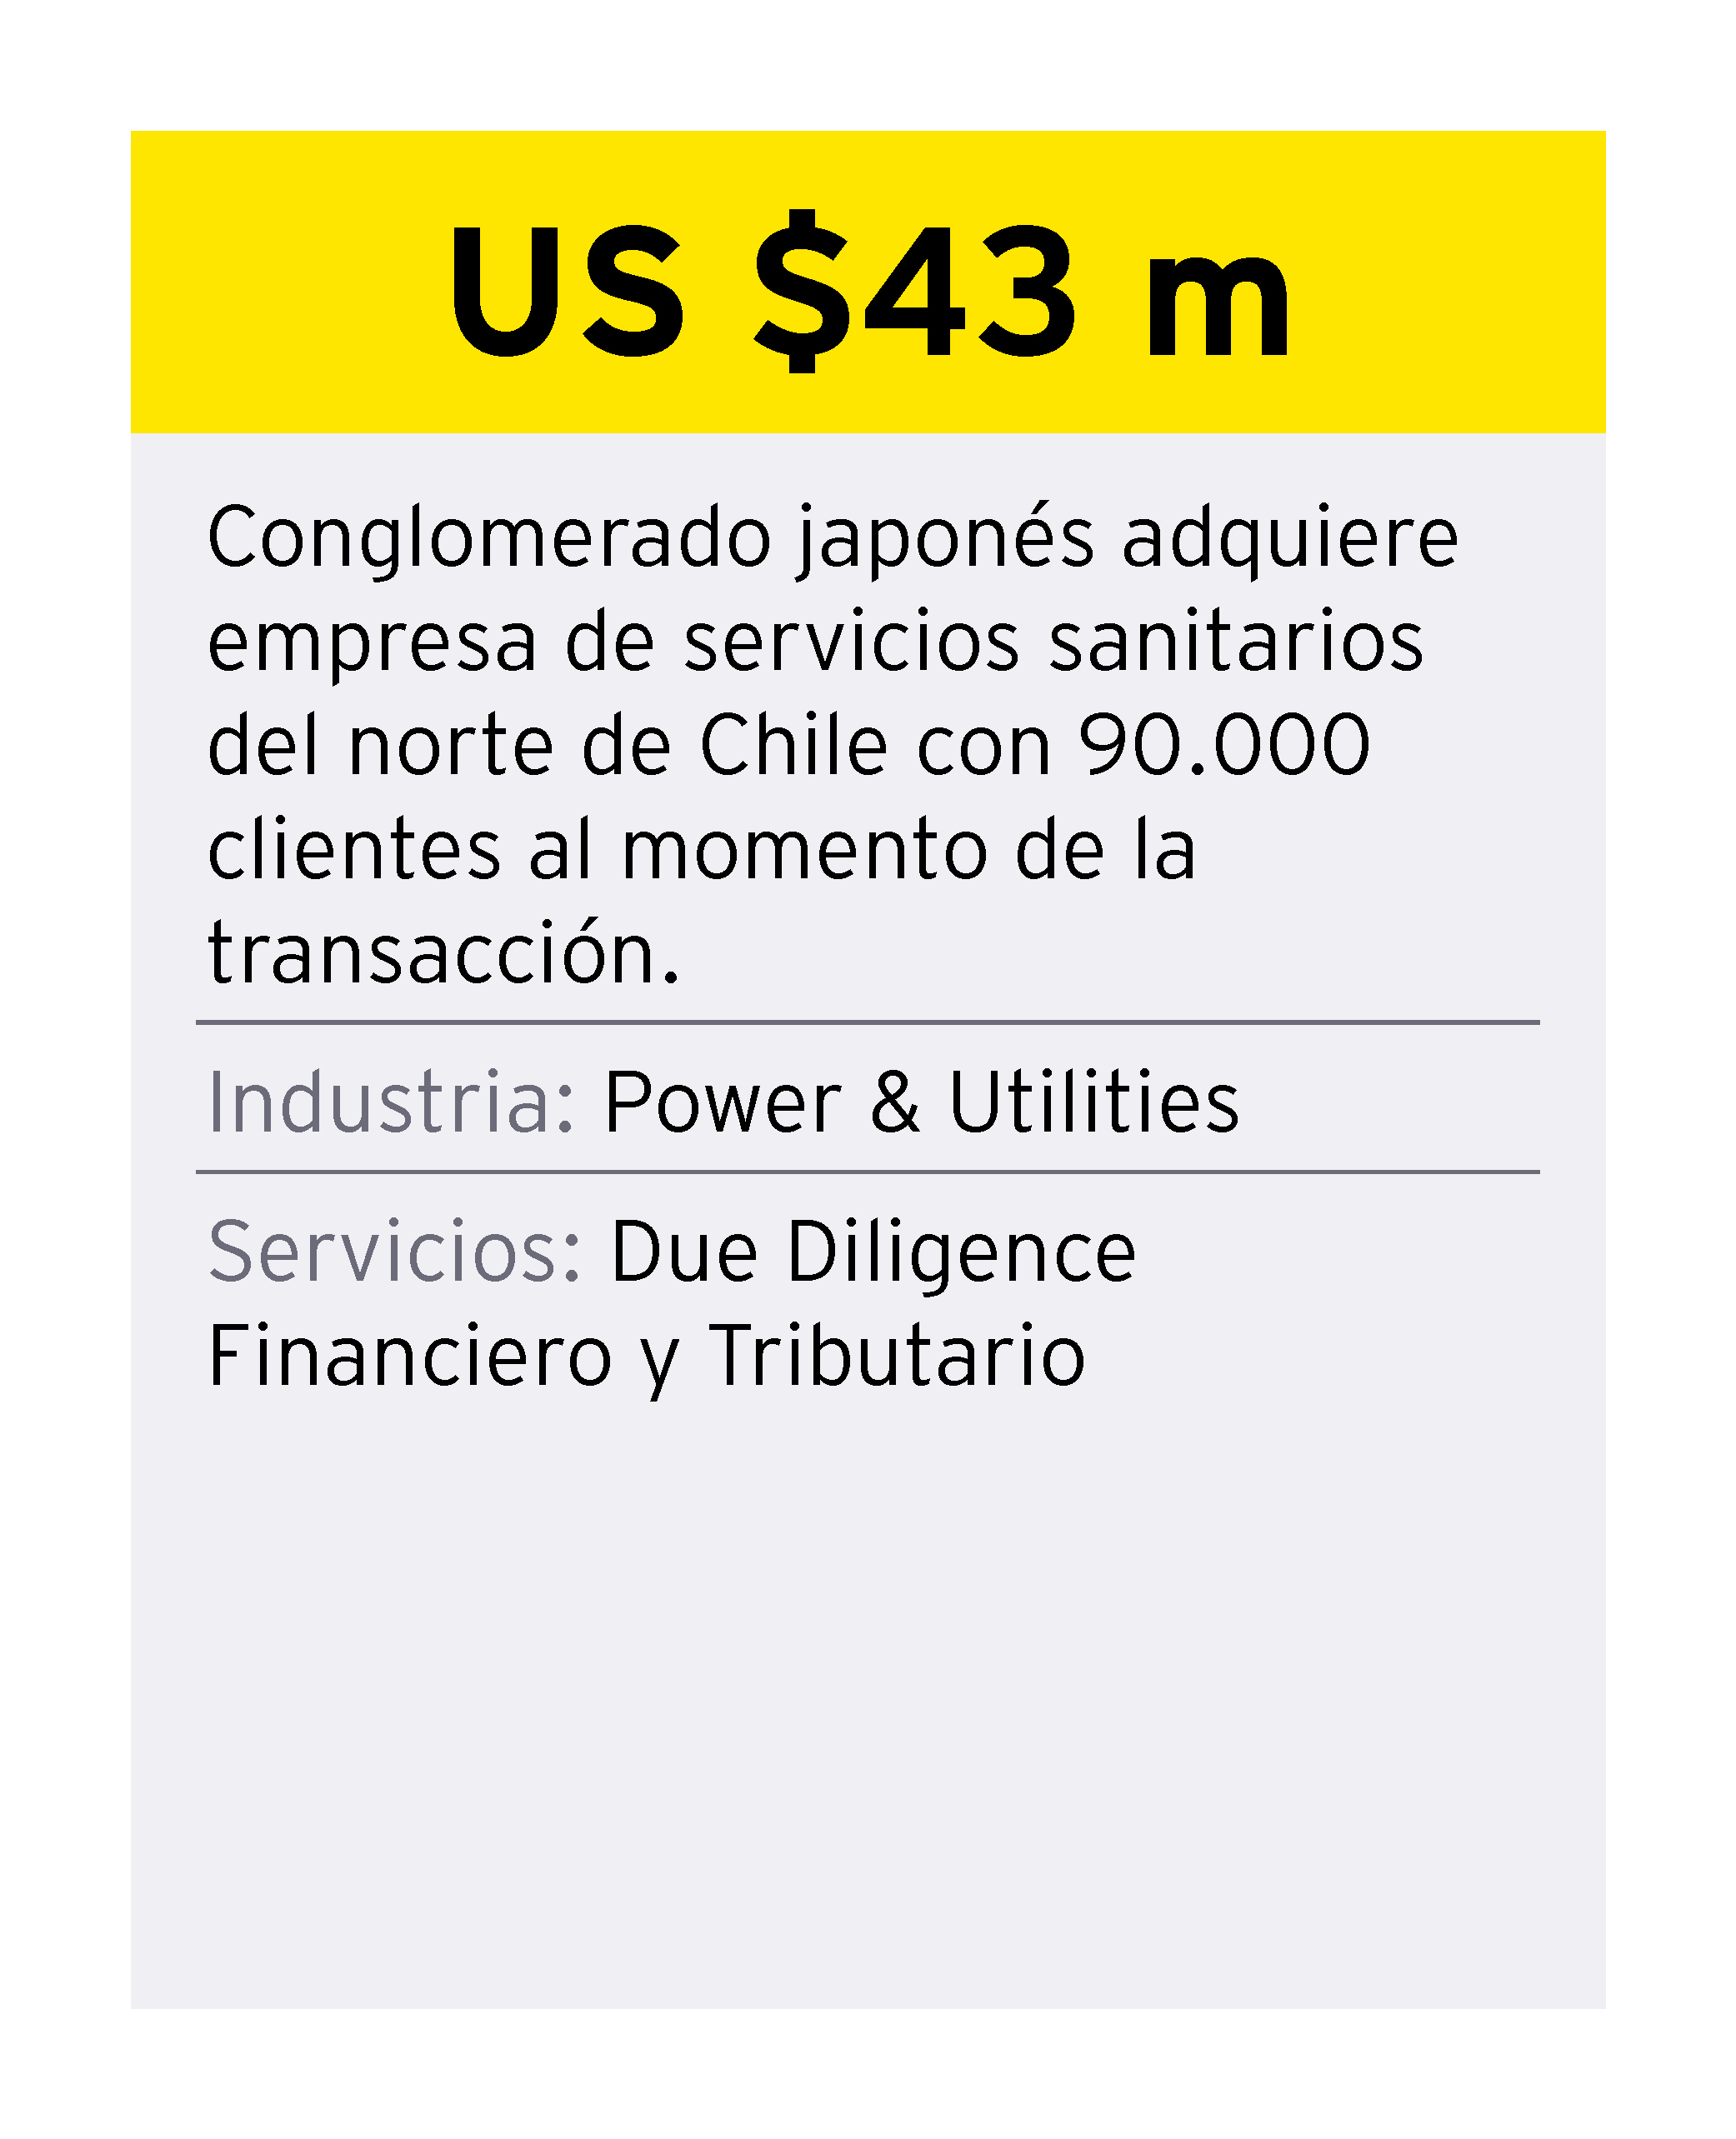 ey-chile-credencial-4-energy